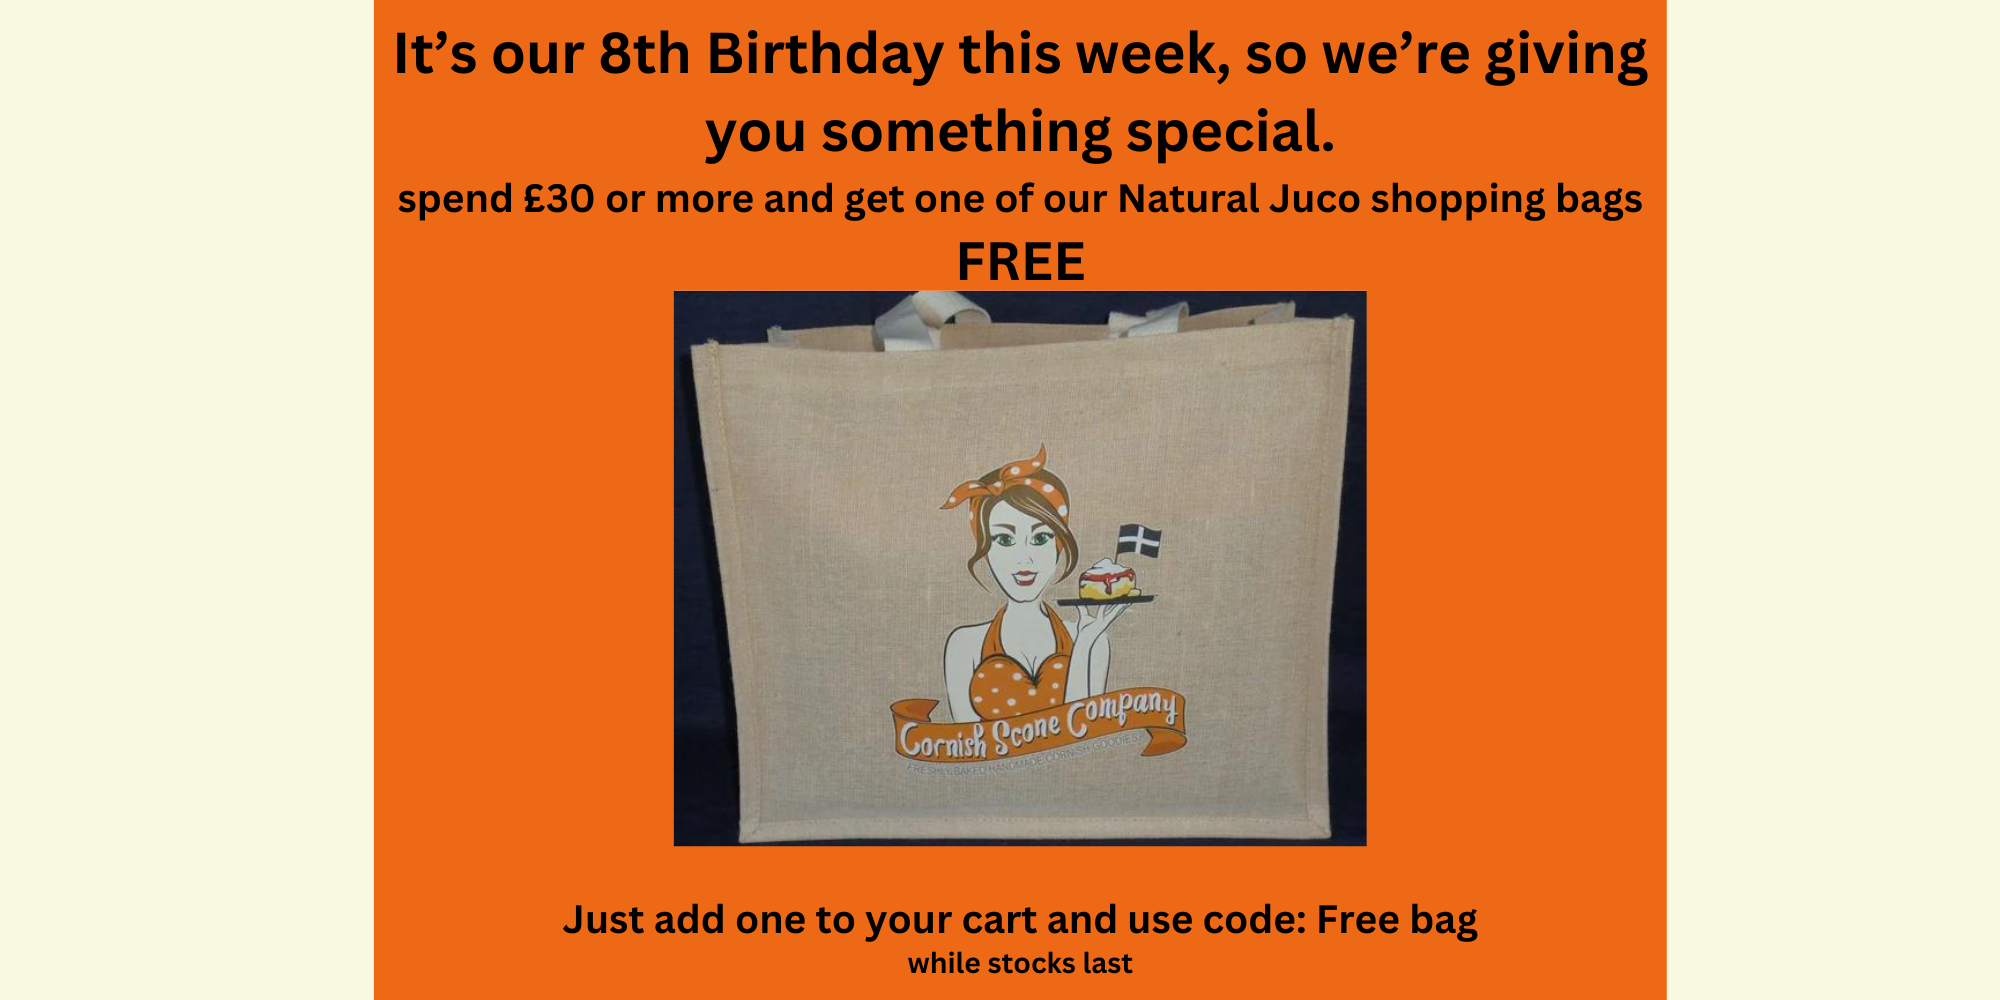 Free juco shopping bag when you spend £30 or more